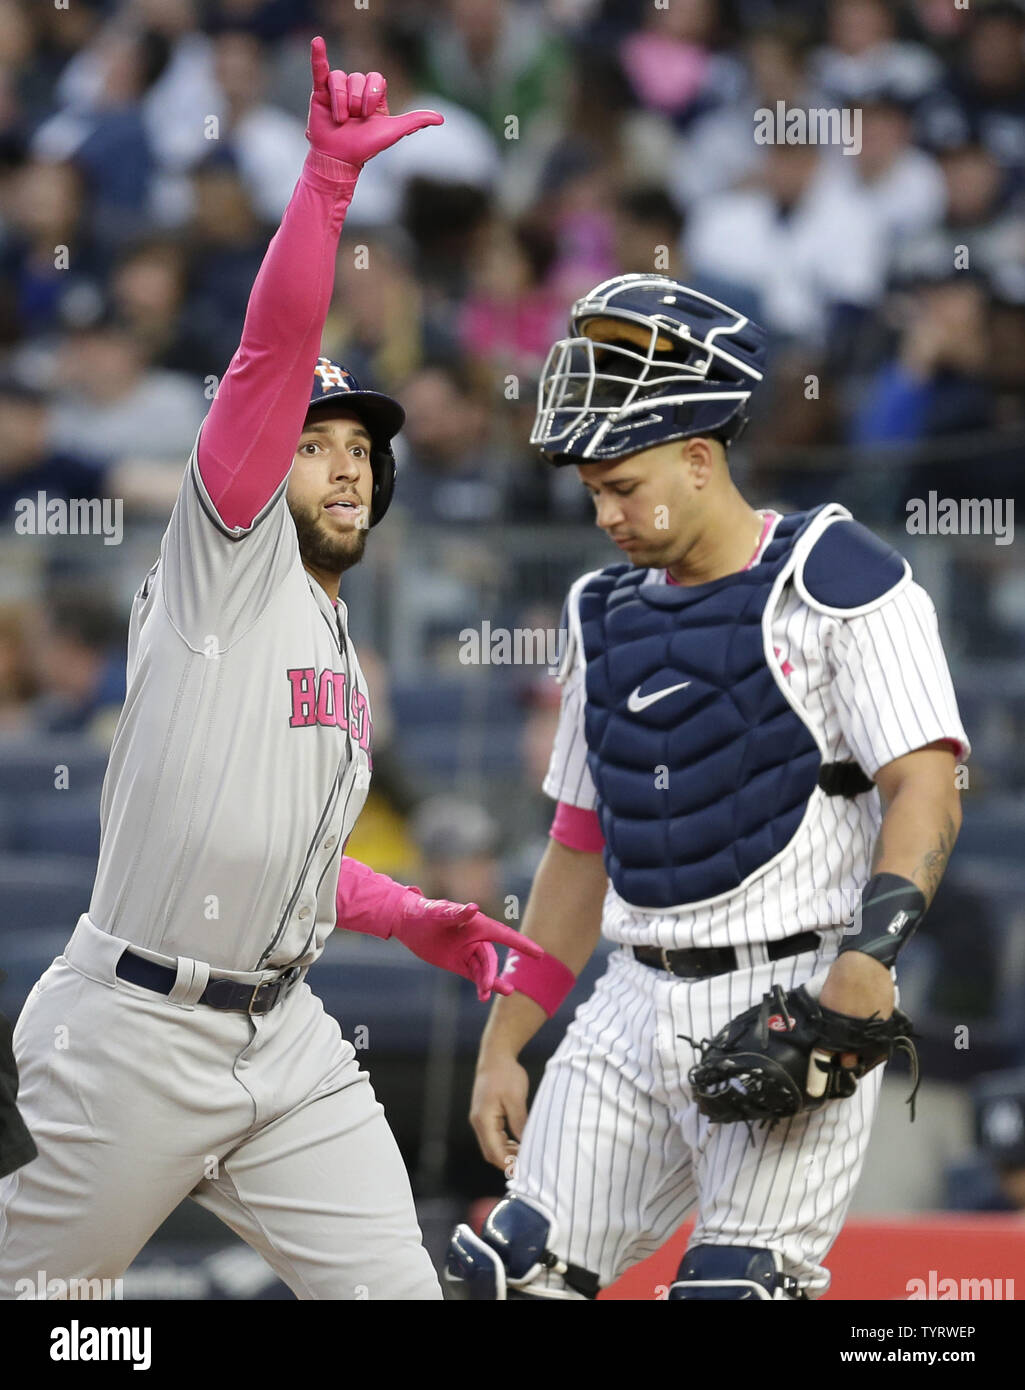 Houston Astros George Springer celebrates after hitting a lead off solo home run in the first inning off of New York Yankees starting pitcher Masahiro Tanaka at Yankee Stadium in New York City on May 14, 2017. The New York Yankees former shortstop Derek Jeter before the game had his No. 2 retired and was also honored with a plaque in Monument Park.     Photo by John Angelillo/UPI Stock Photo